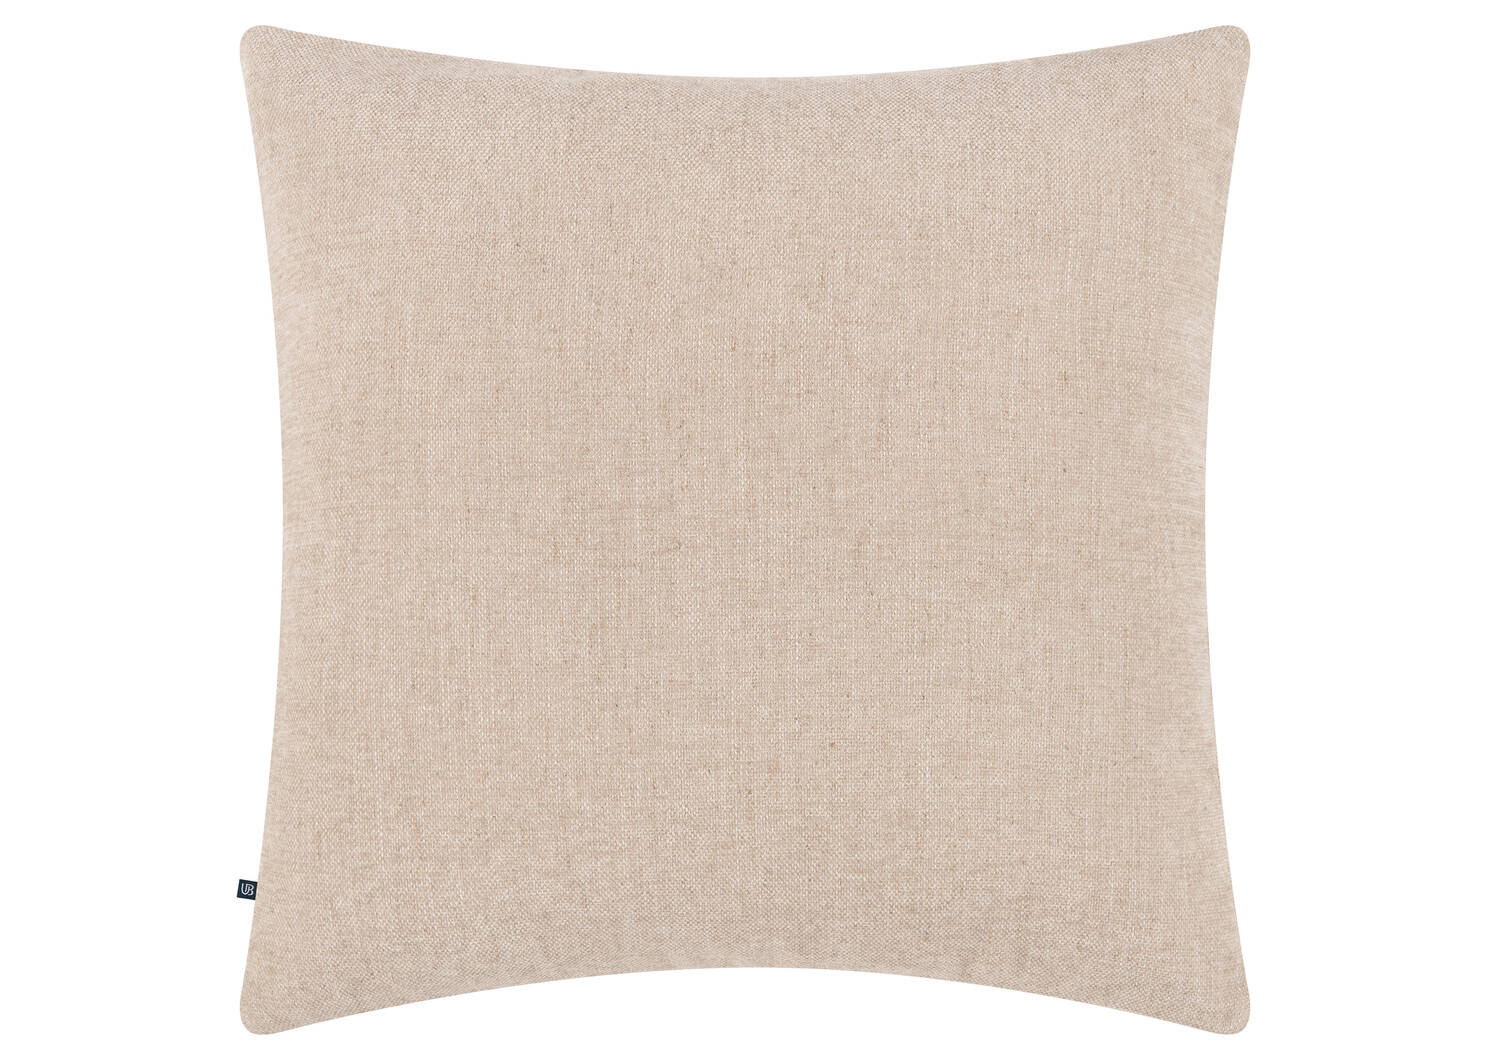 Finmere Pillow 20x20 Sand